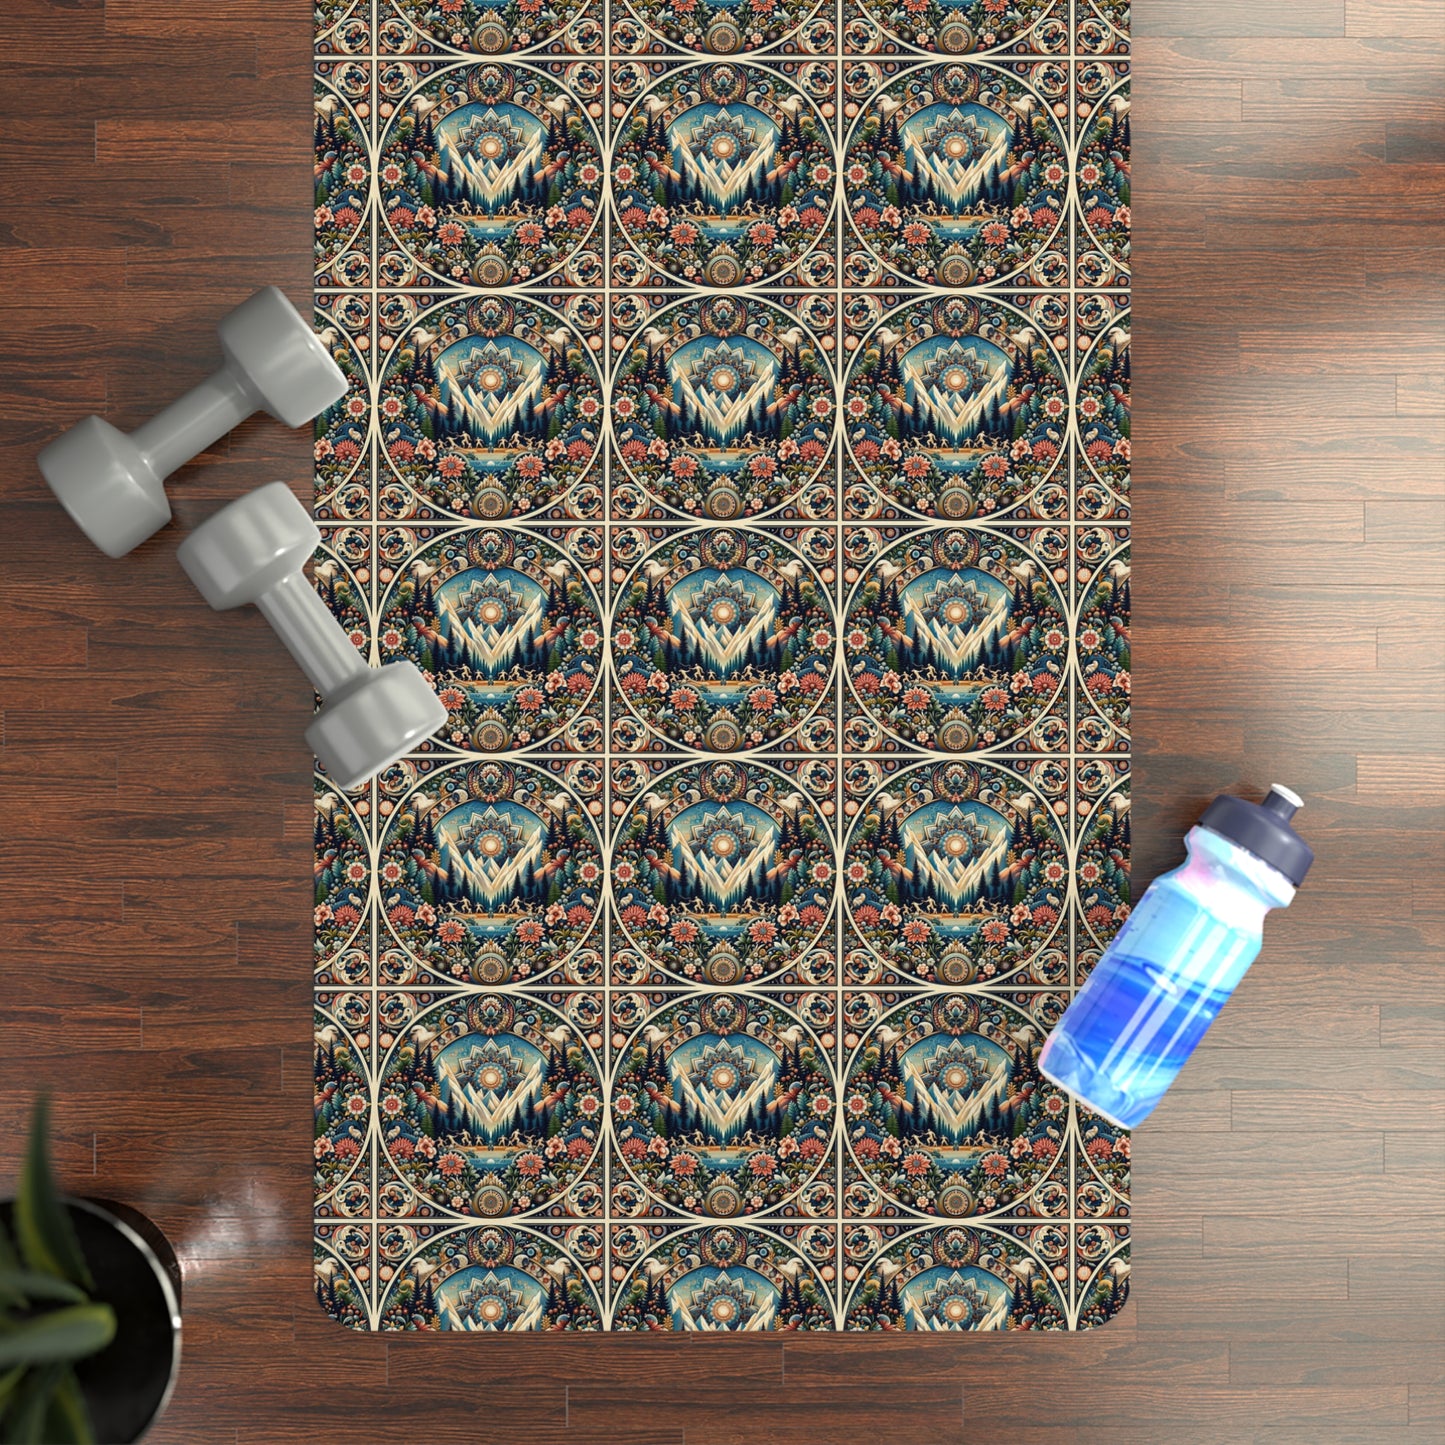 Artistic Odyssey Yoga Mat: Luxe Microfiber with Global Artistic Design